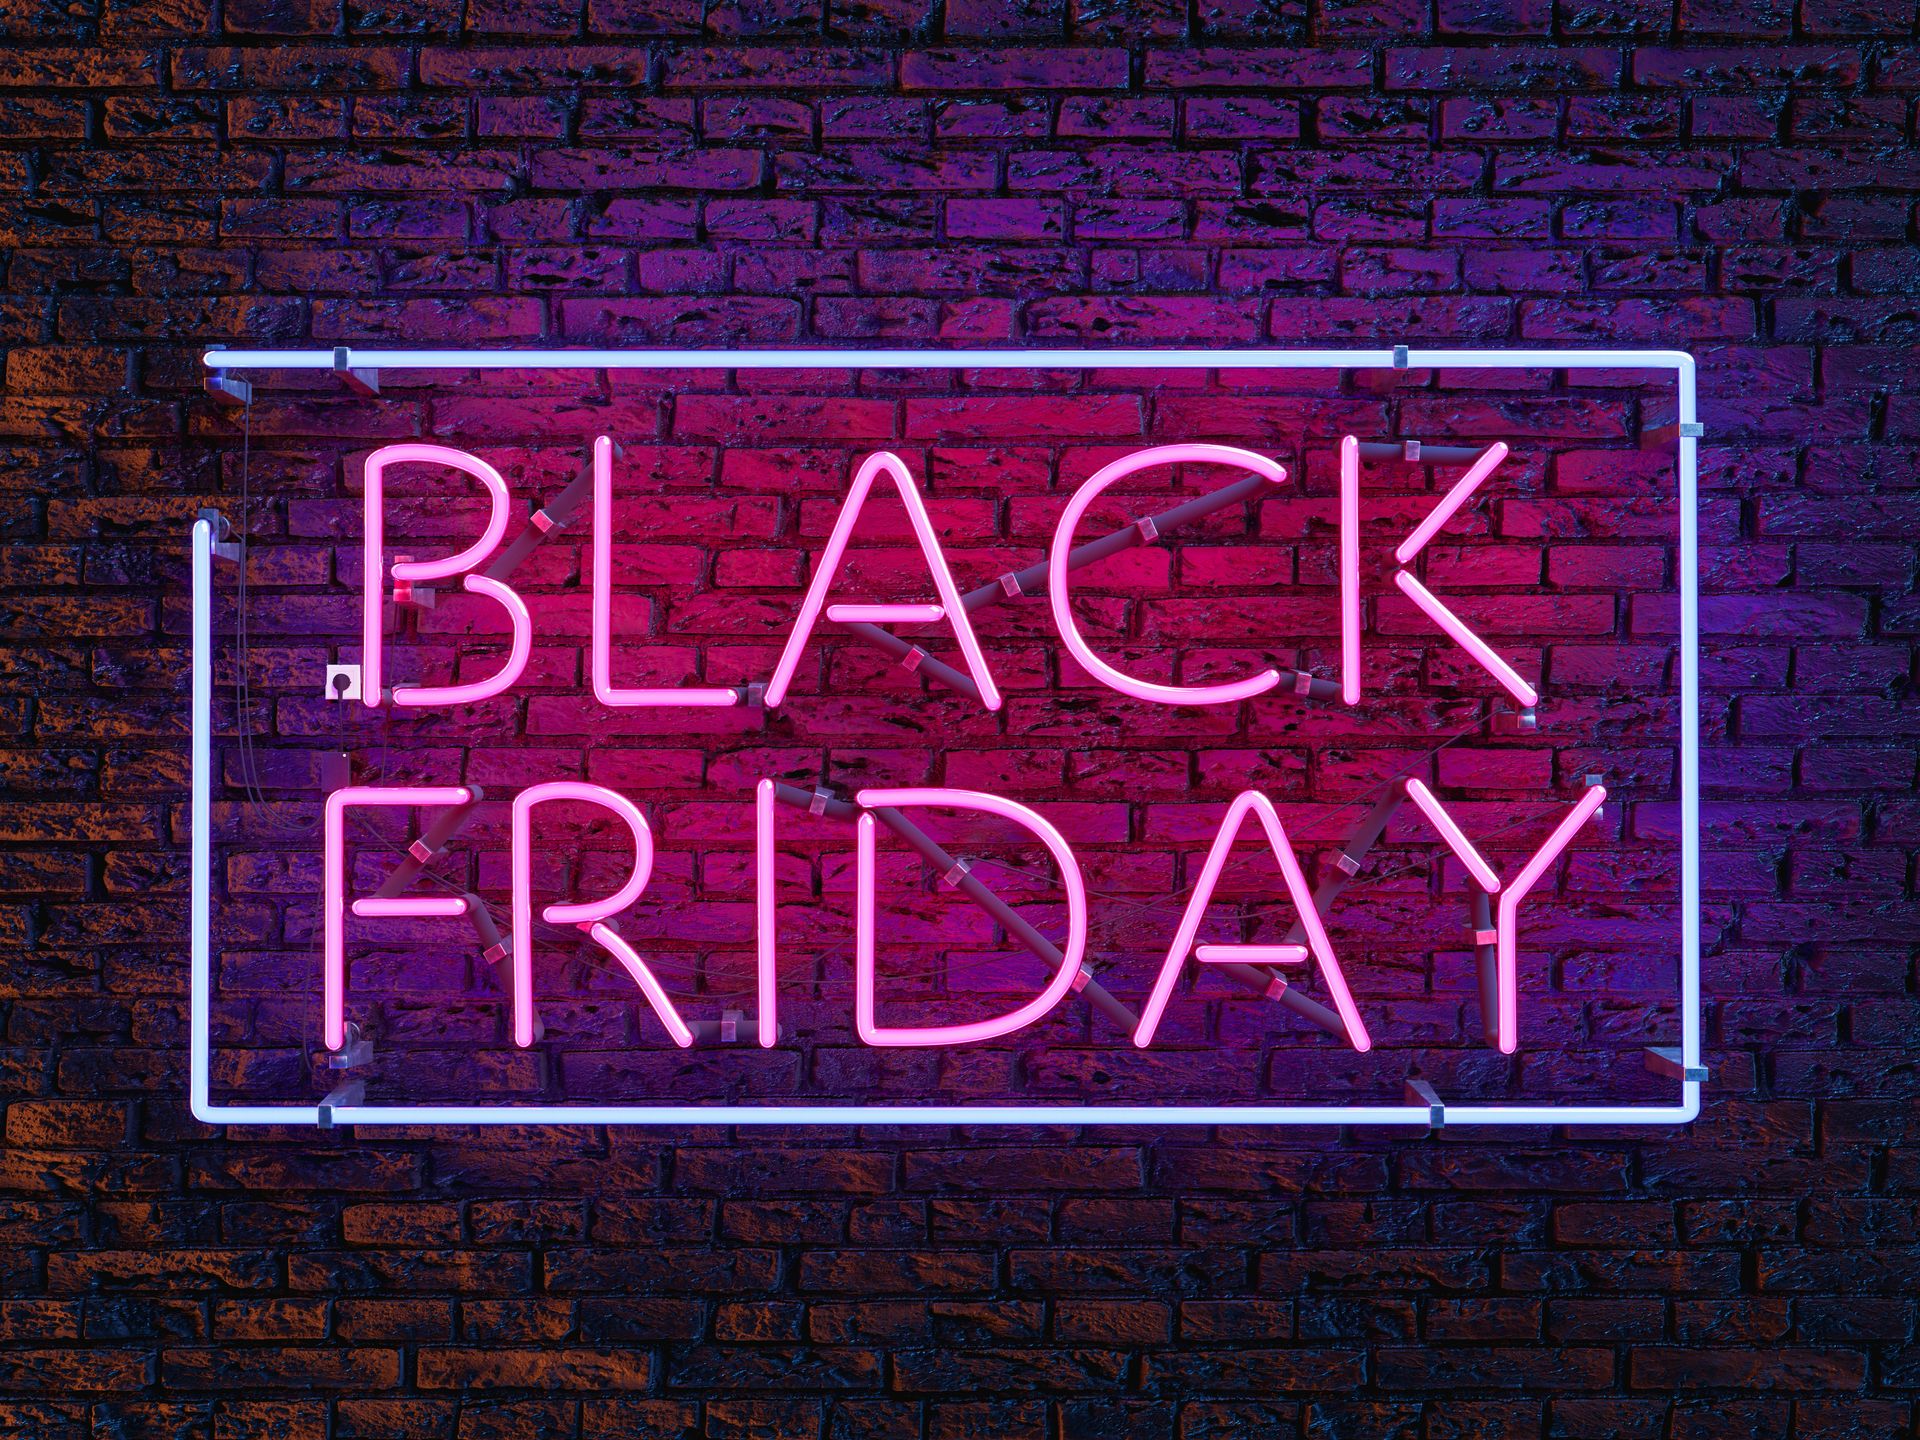 Best Black Friday offers: 36 of the absolute best deals that are